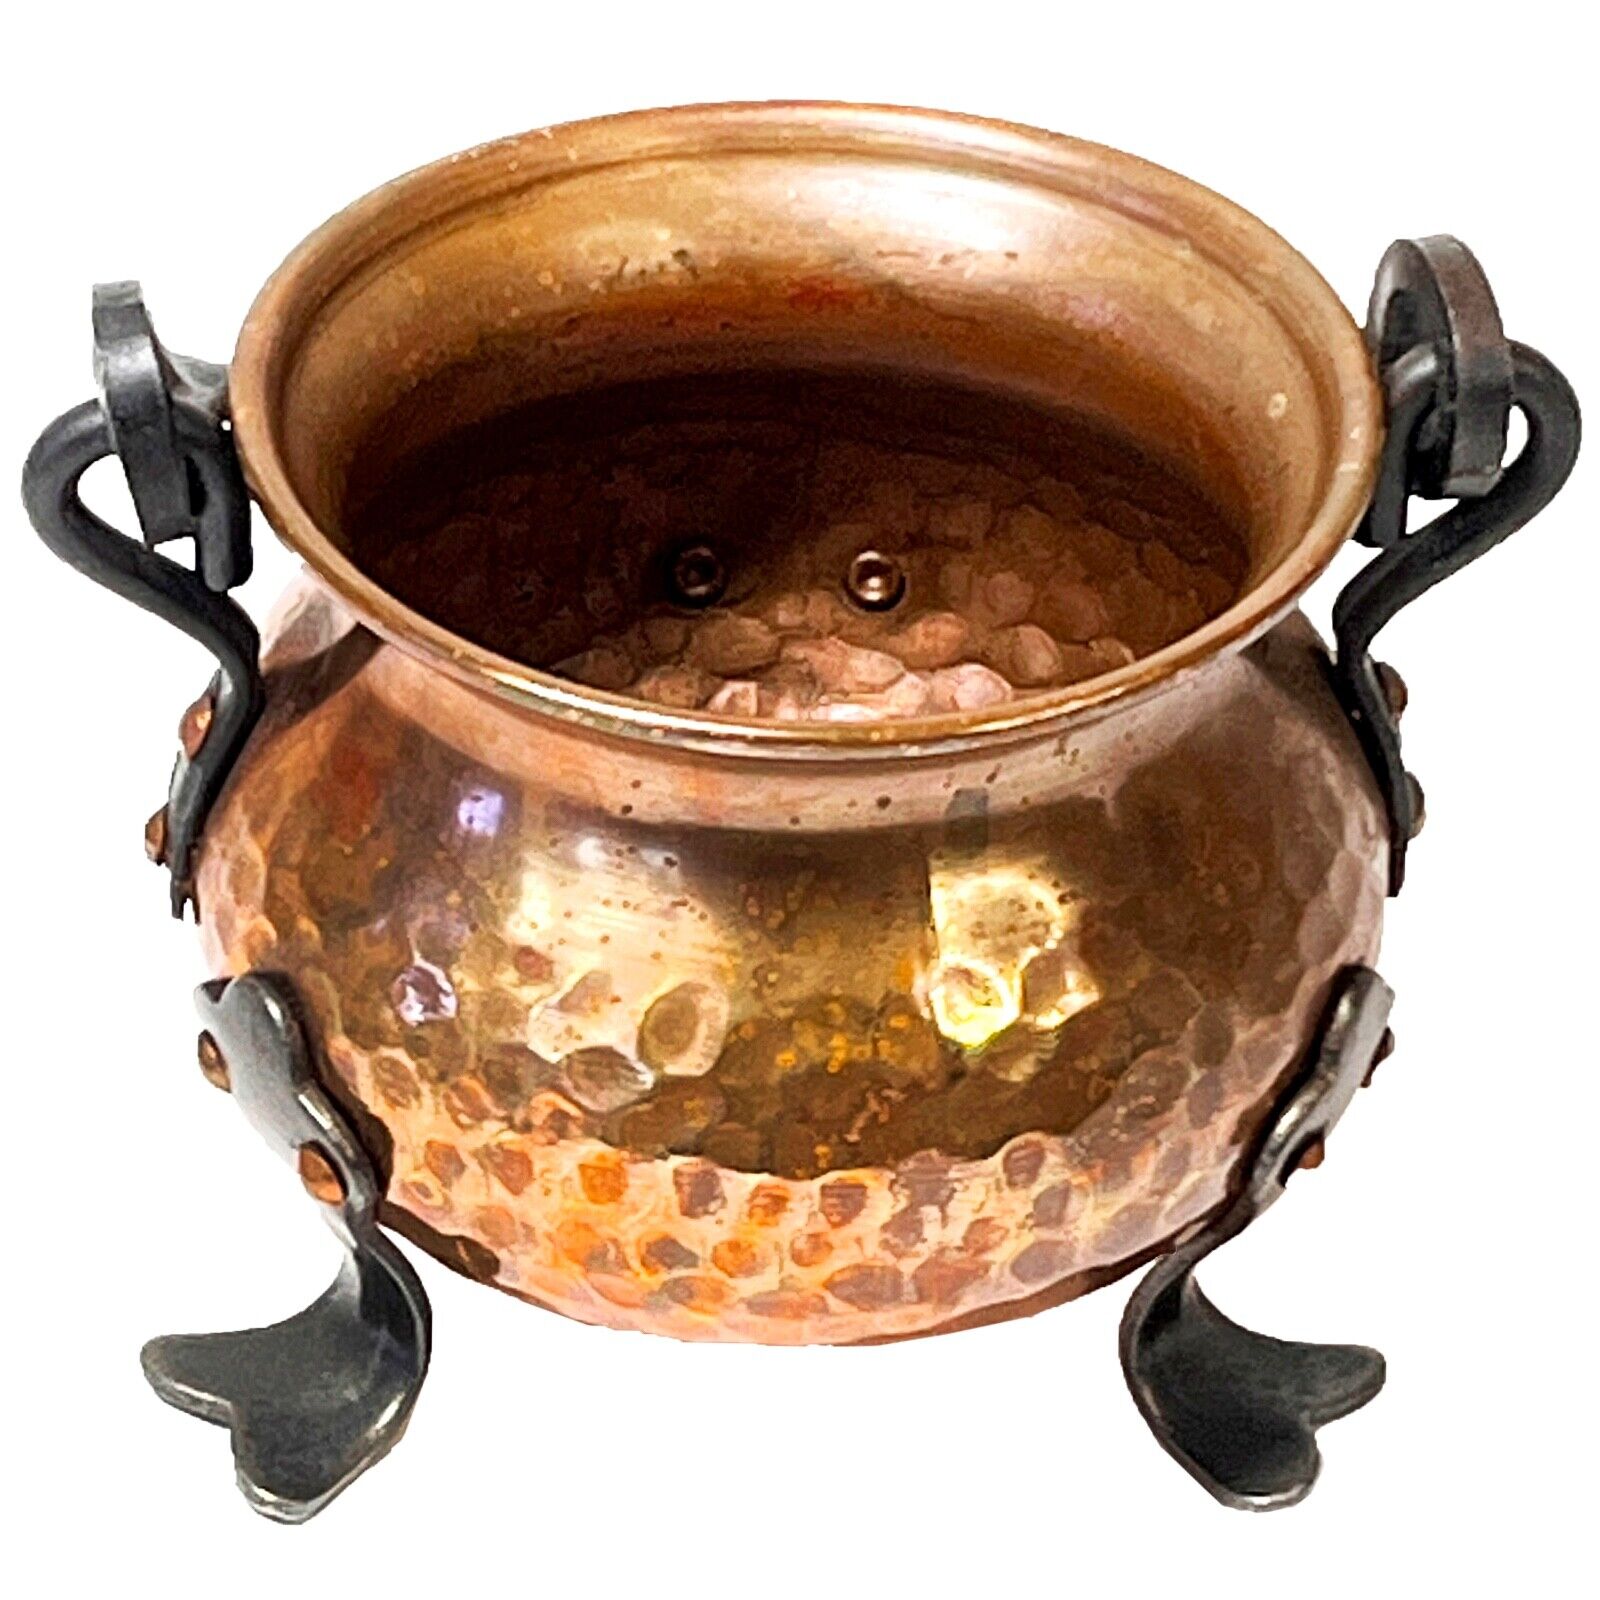 Small Hammered Copper Cauldron Cast Iron Bail Handle Three Feet Made in Germany